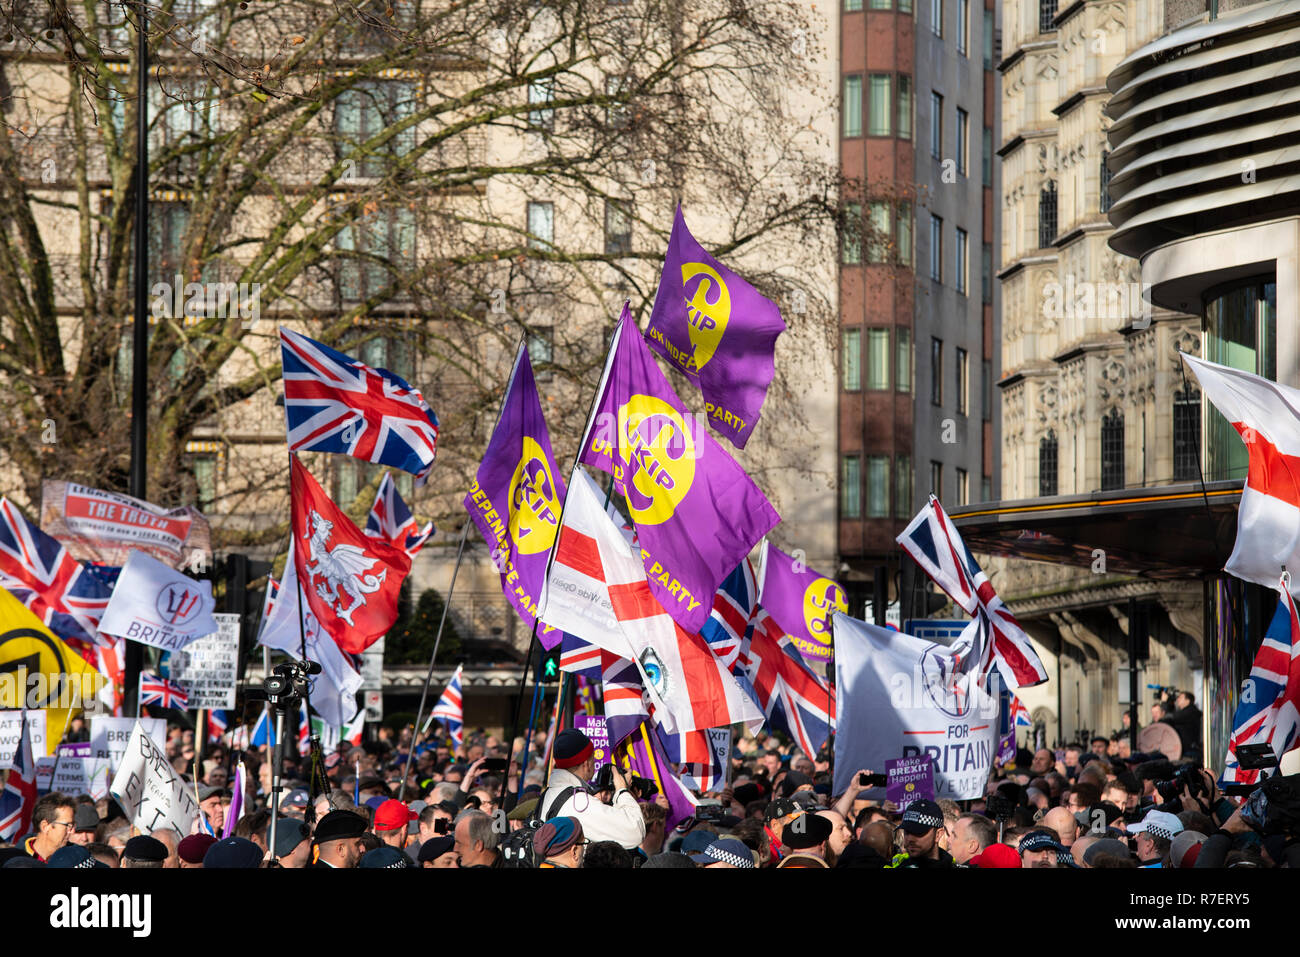 Brexit Betrayal march. Protesters are demonstrating at what they see as a betrayal by the UK government in not following through with leaving the EU in its entirety after the referendum. UKIP flags Stock Photo